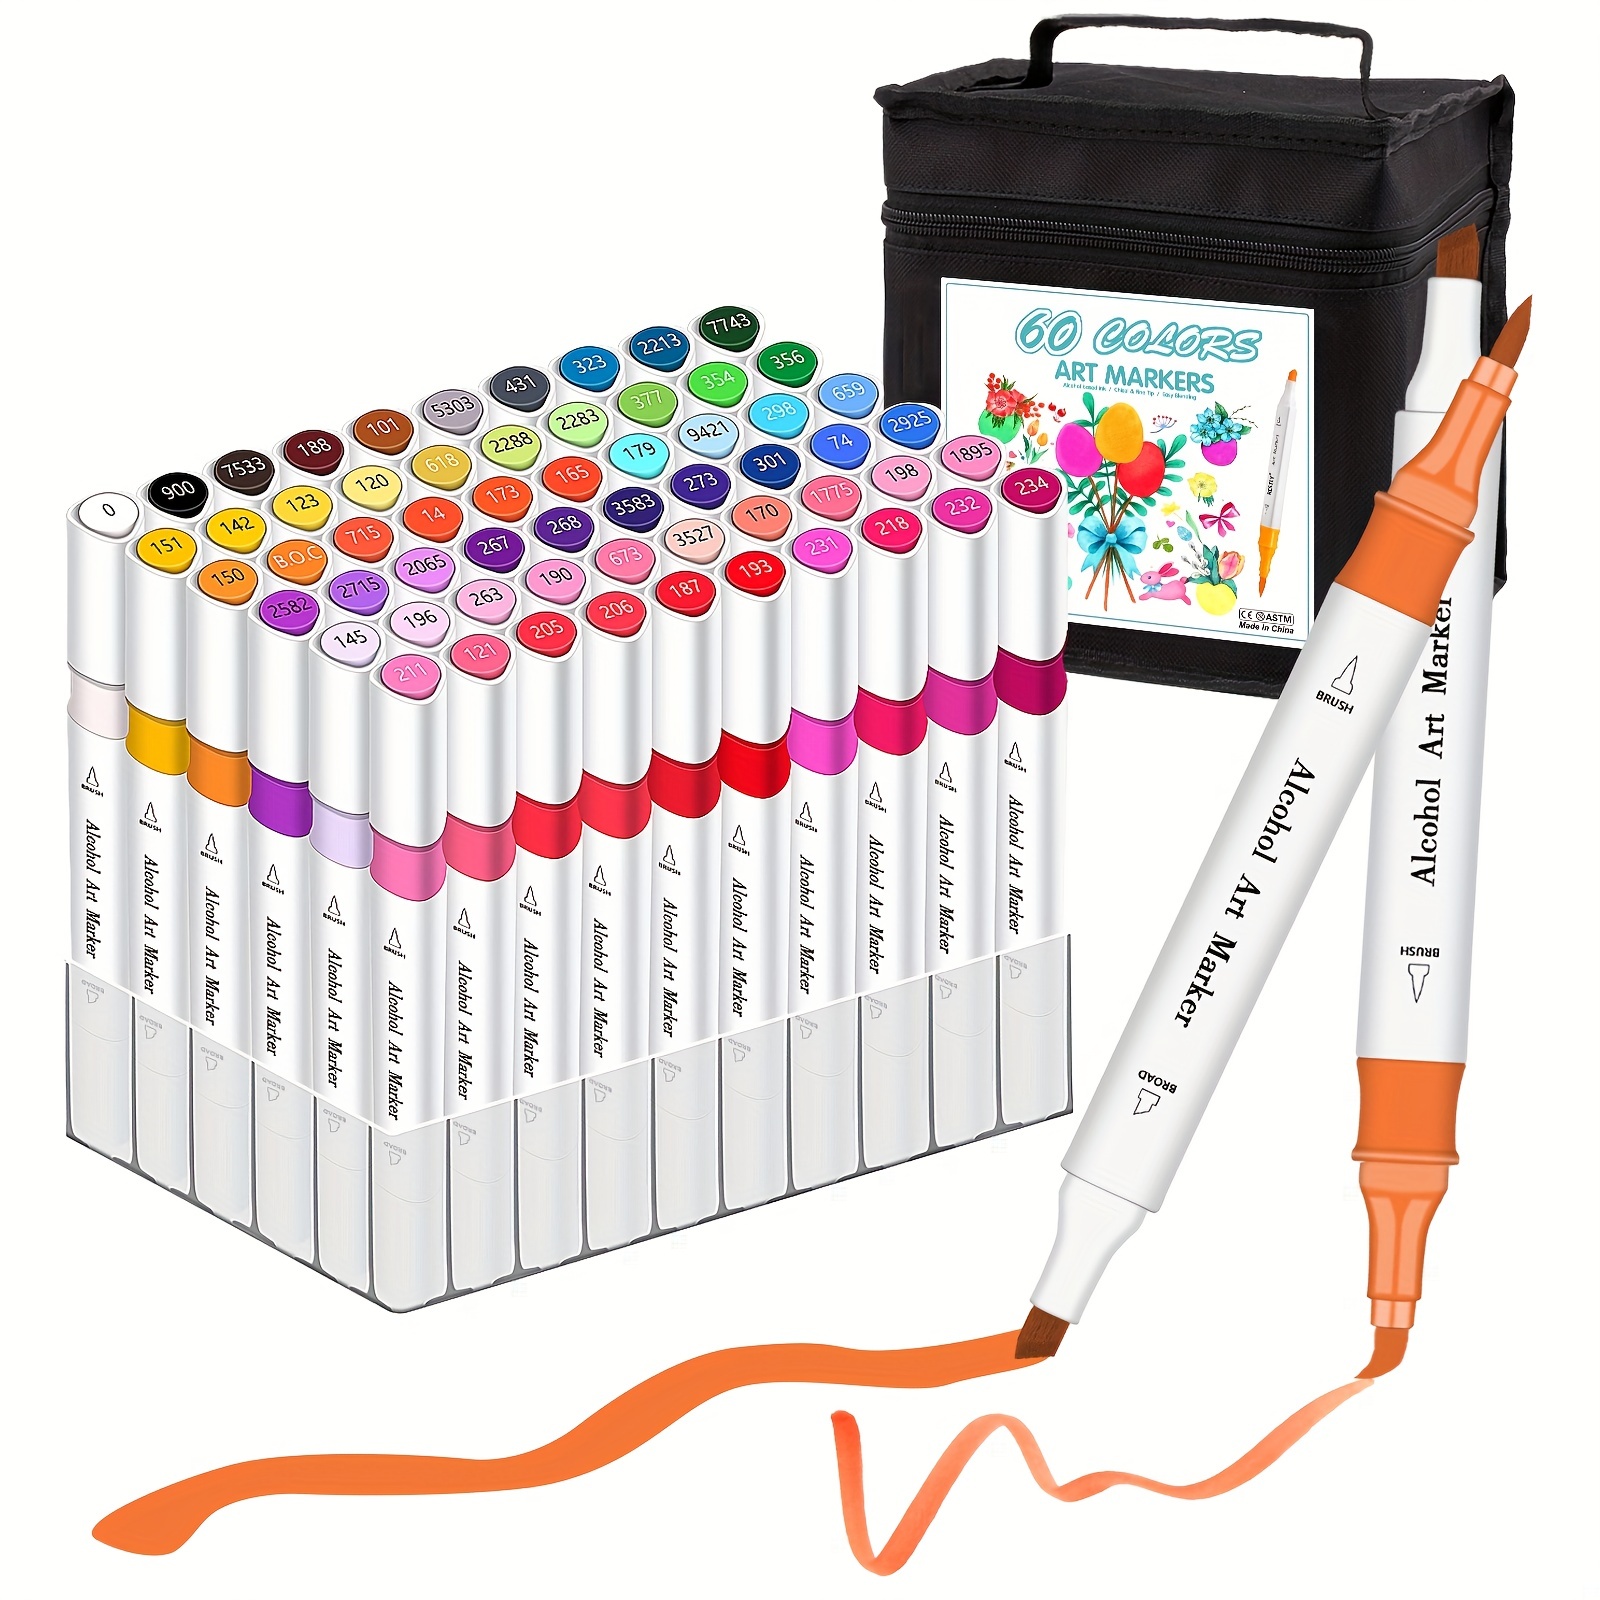 60-color Alcohol Marker Art Marker Set, Dual-head Pen Tip, Waterproof And  Quick-drying Non-toxic, Suitable For Painting, Adult Coloring, Beginners,  Dyeing, Writing, Marking, Diy Design, Can Be Used As Holiday Gifts, Student  Back-to-school